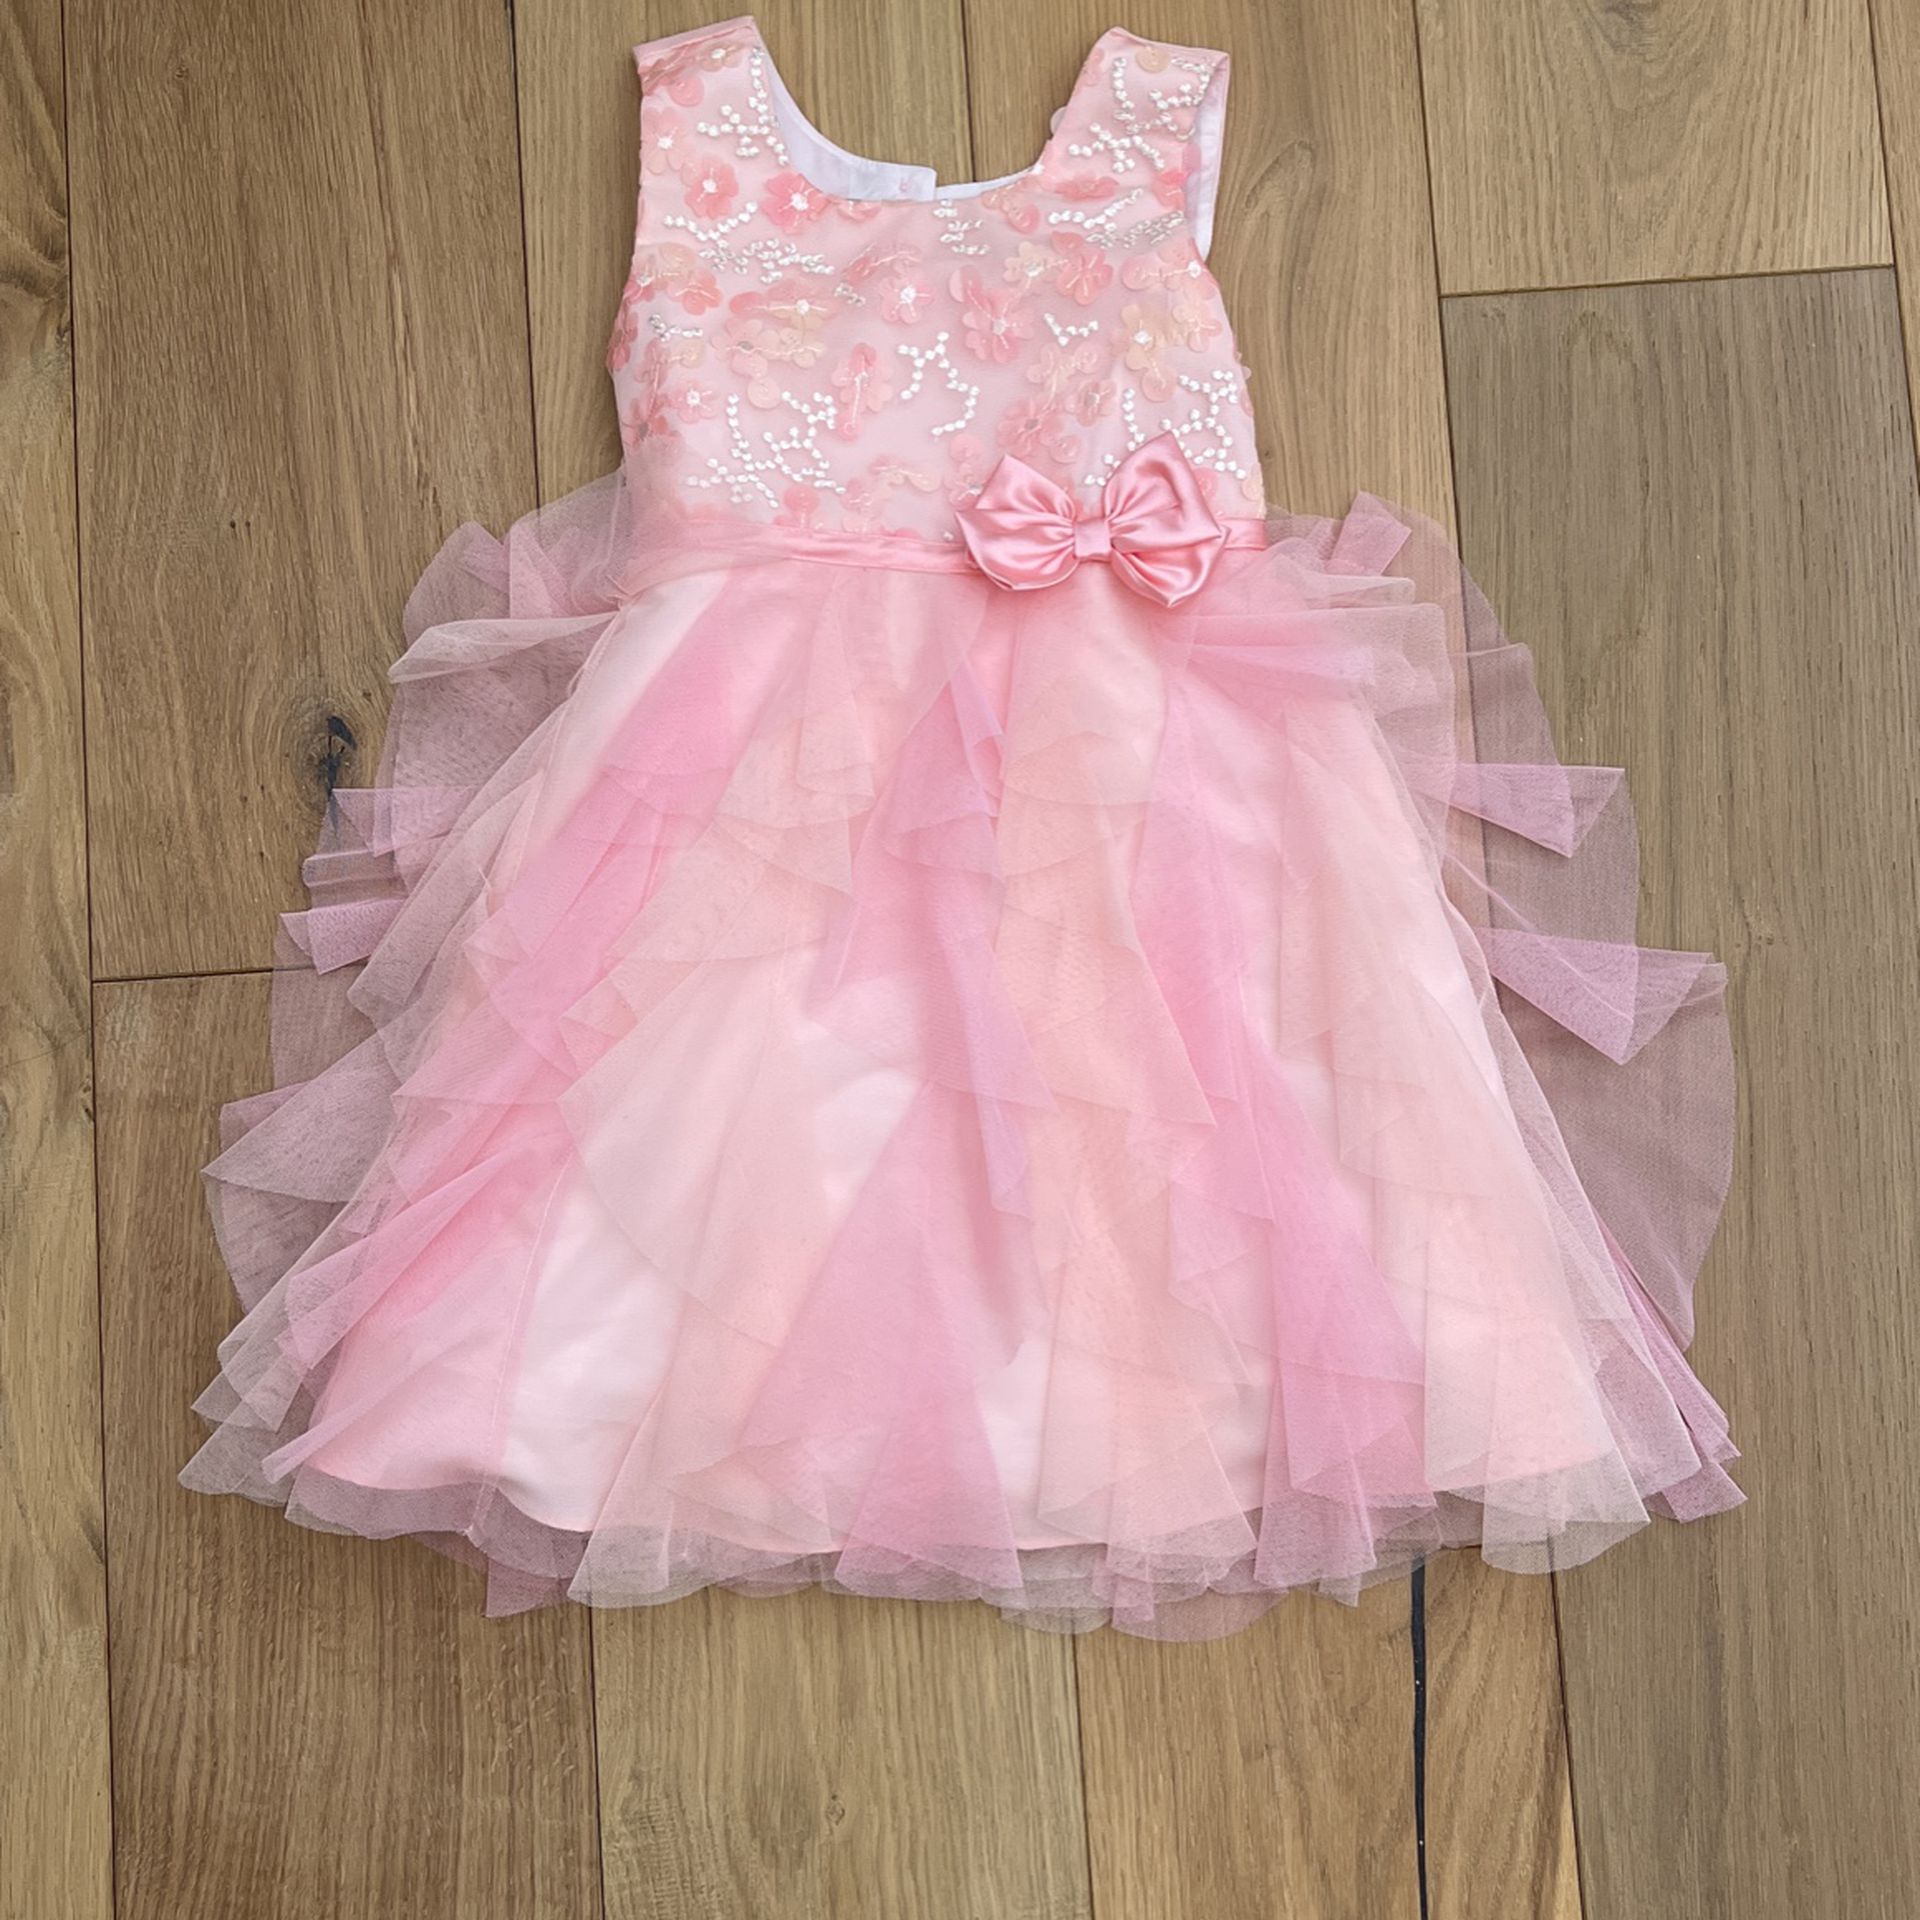 Girls Pink Party Dress Size 5